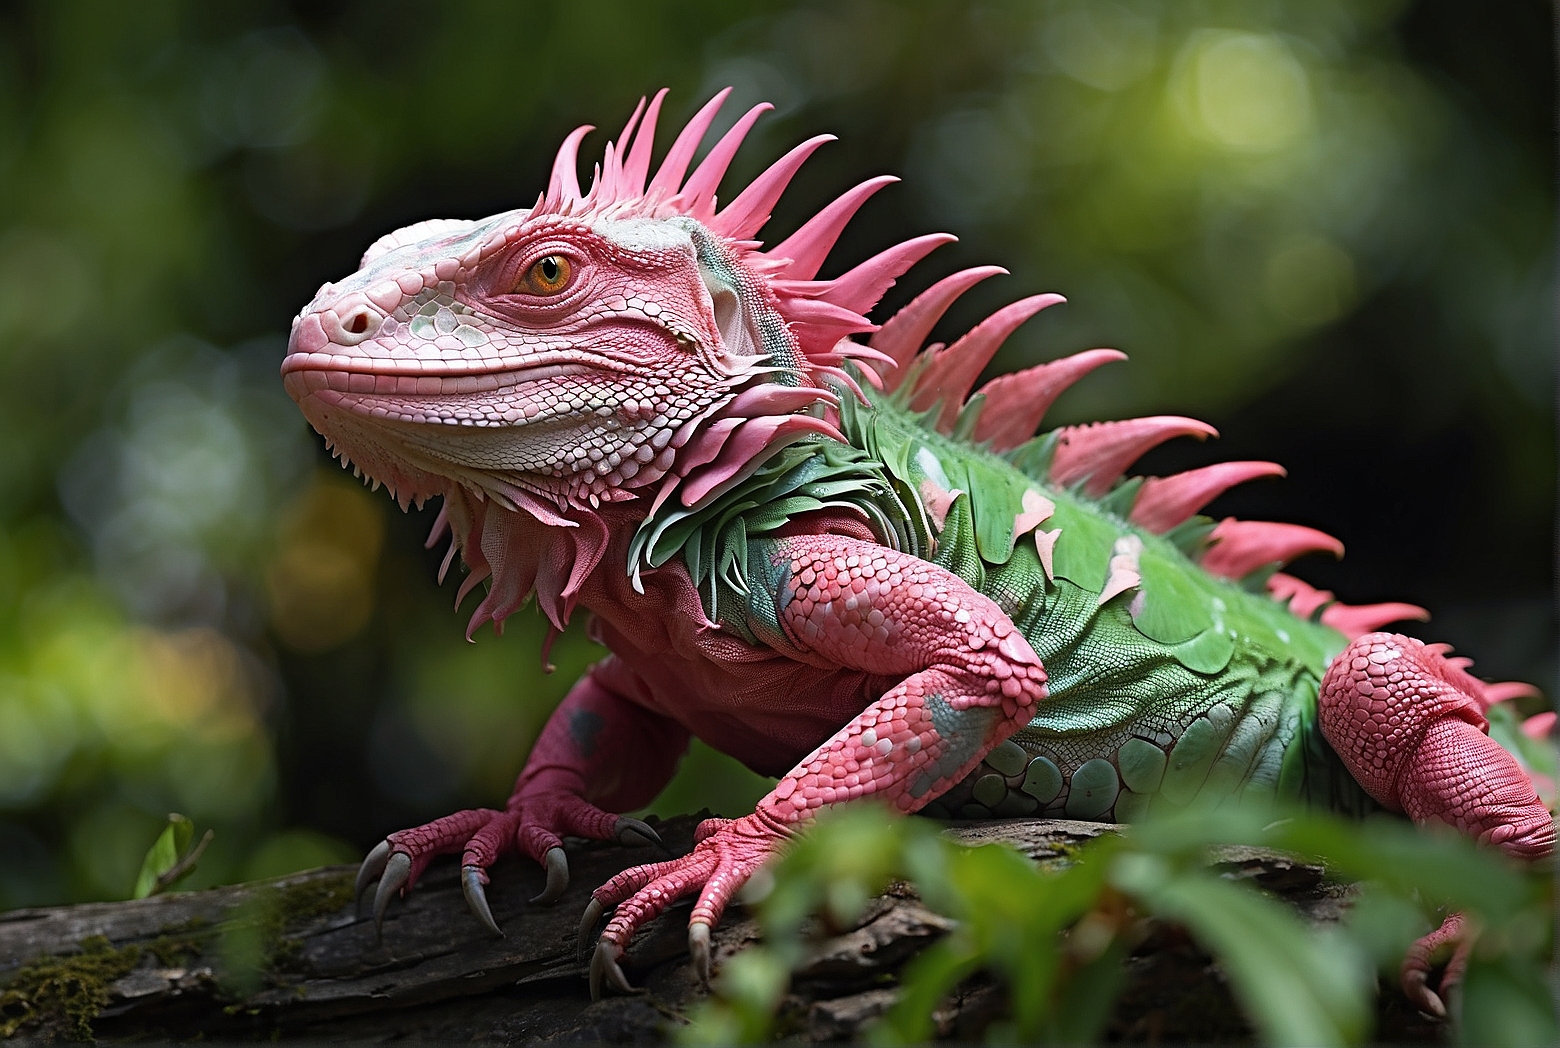 The Pink and Green Iguana